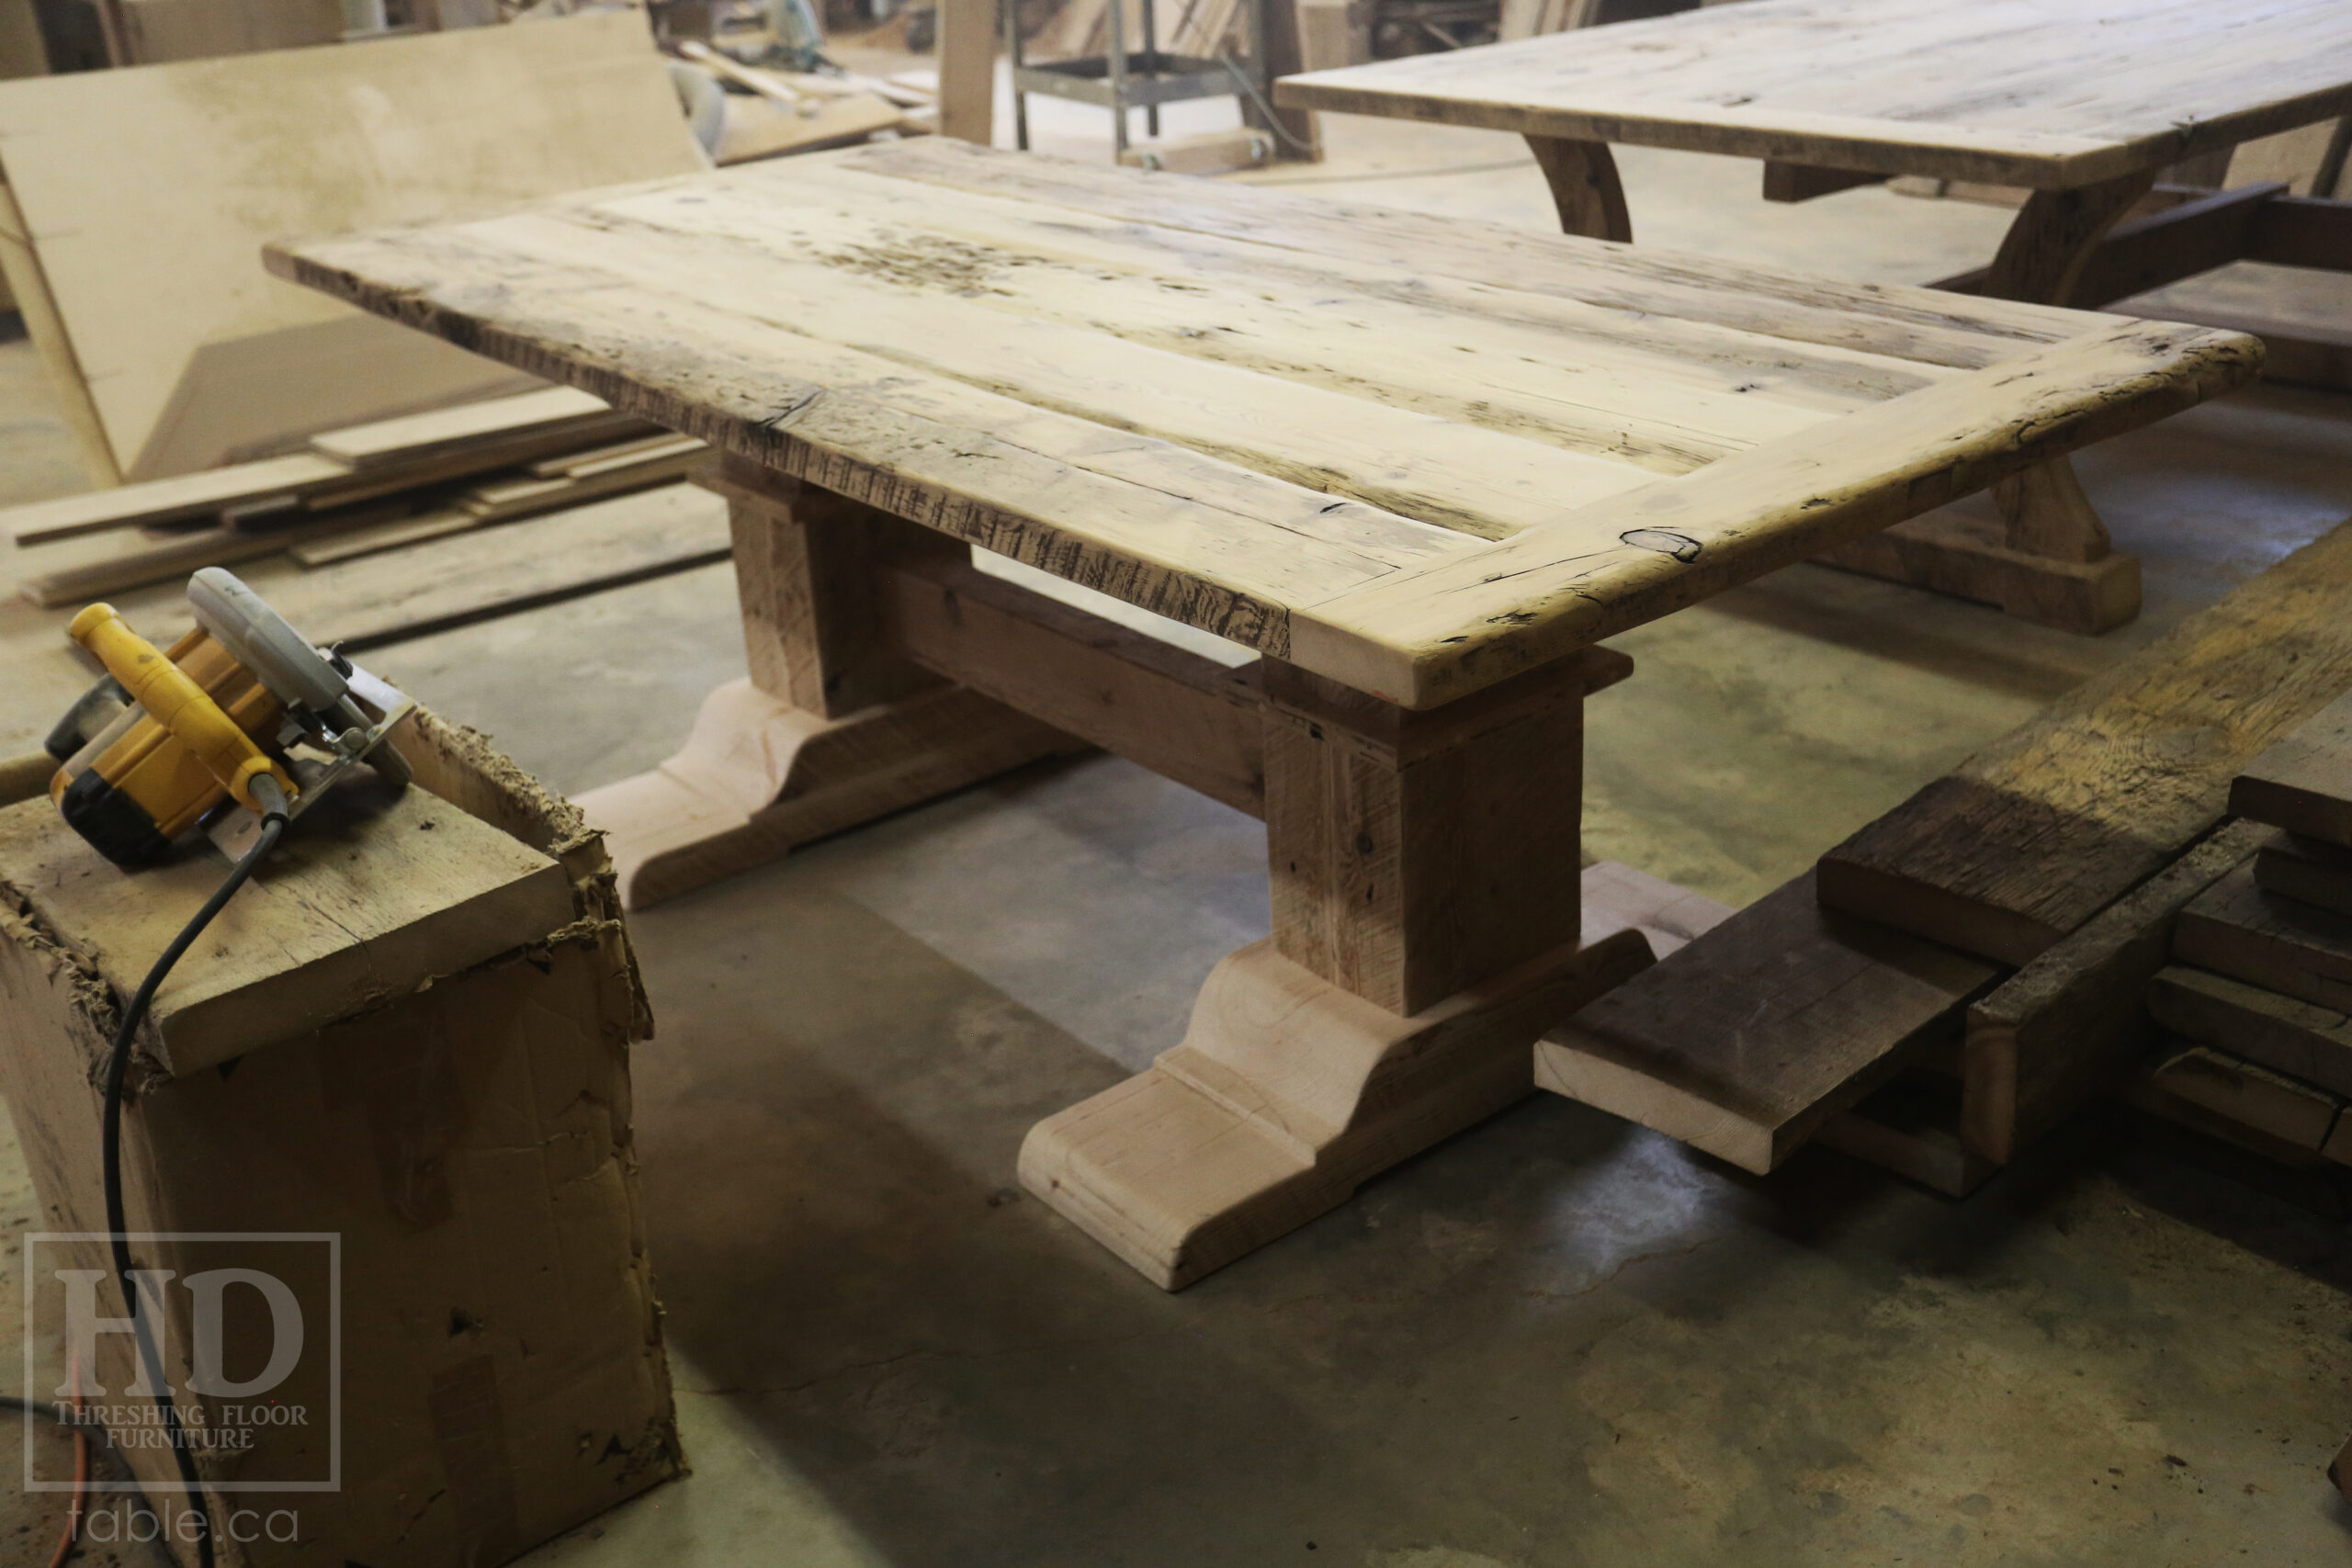 7' Ontario Barnwood Table we made for a Kitchener, Ontario home - 41" wide - Double Pedestal with Rail + Wide Feet Option - Old Growth Hemlock Threshing Floor Construction - Original edges & distressing maintained - Greytone Option - Premium epoxy + matte polyurethane finish - www.table.ca